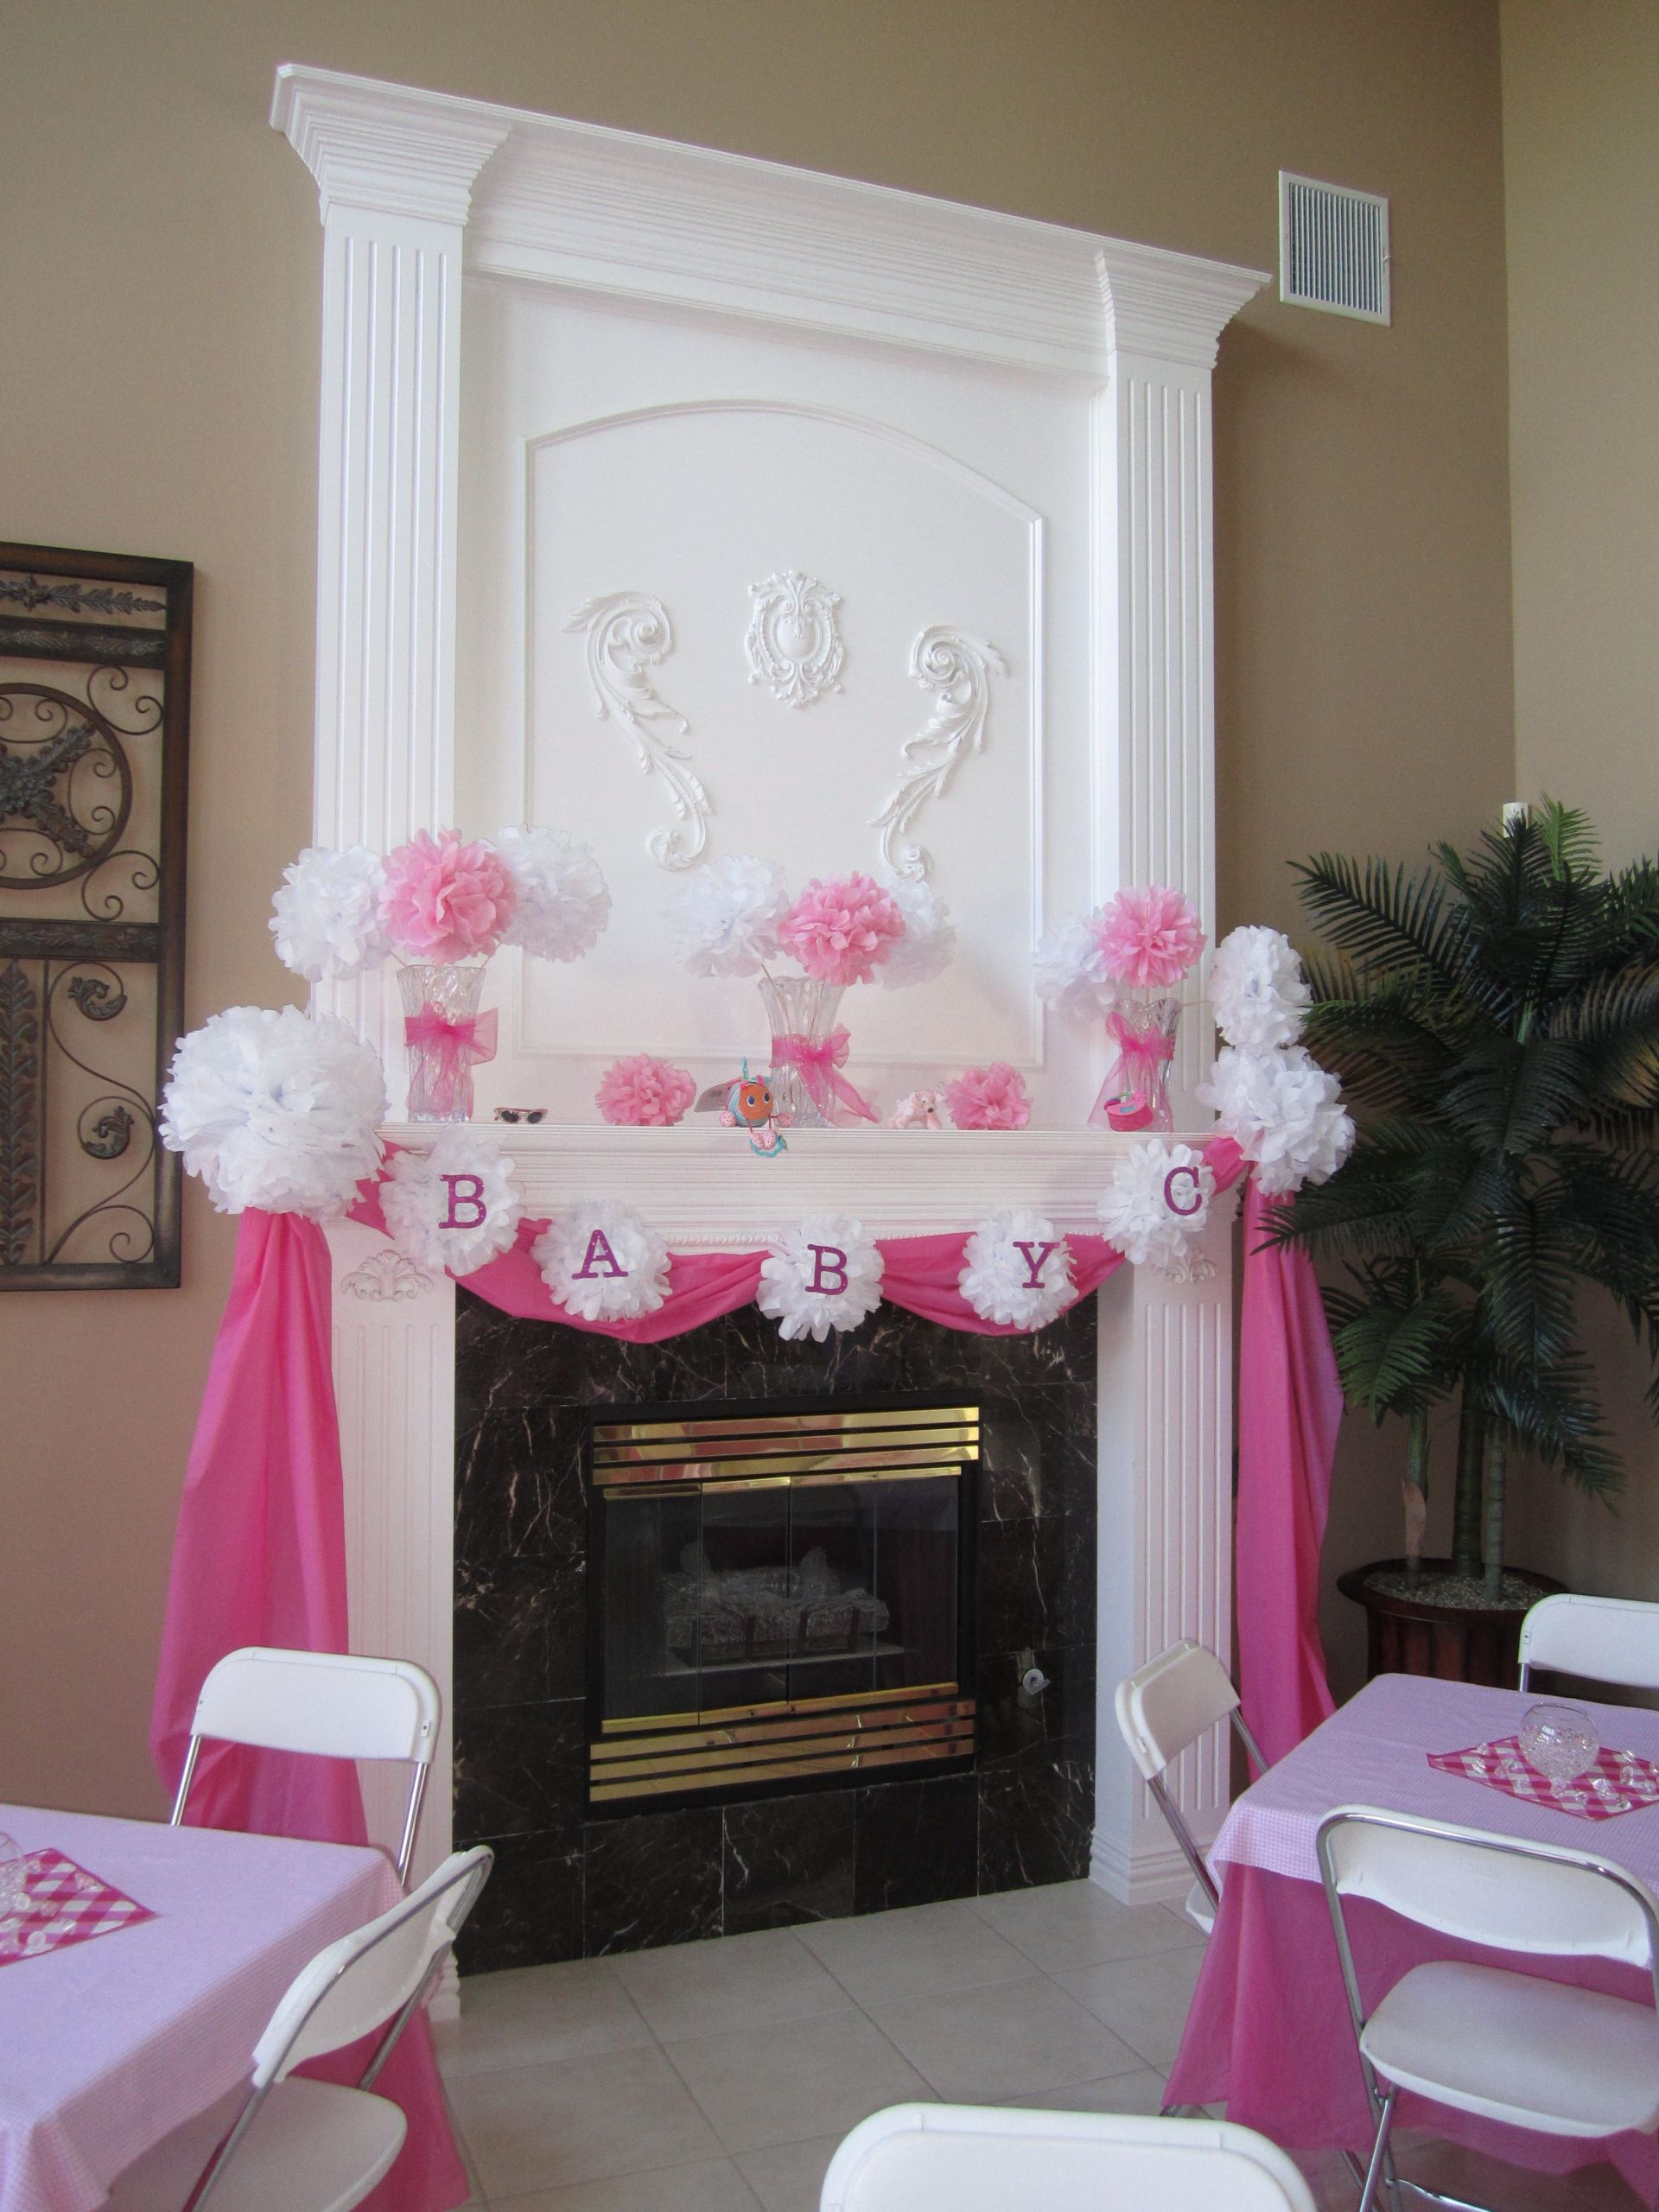 Baby Shower Decorations Ideas For A Girl
 DIY Baby Shower Ideas for Girls